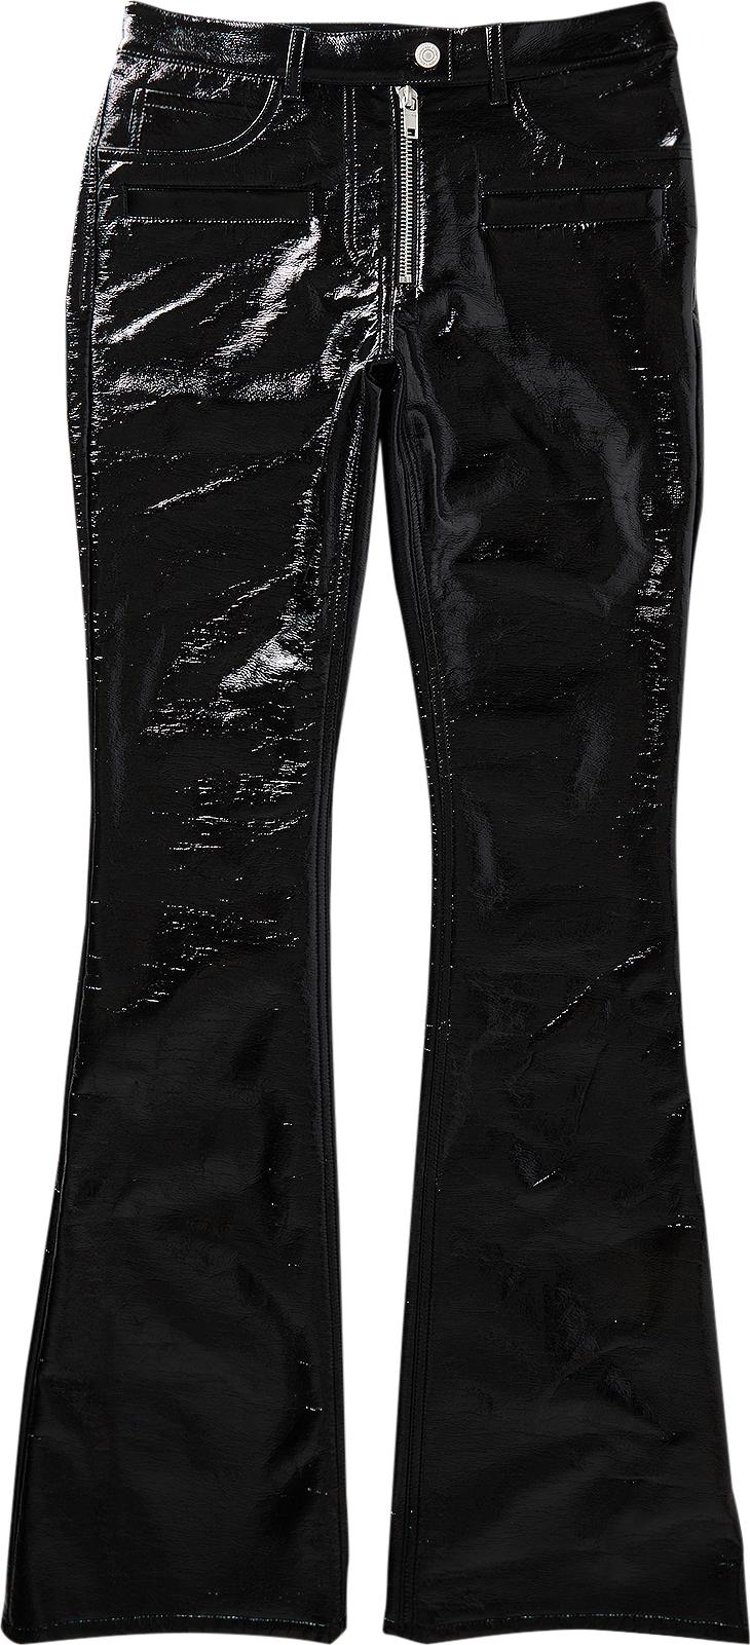 Ribbed-knit high-rise flare pants in black - Courreges